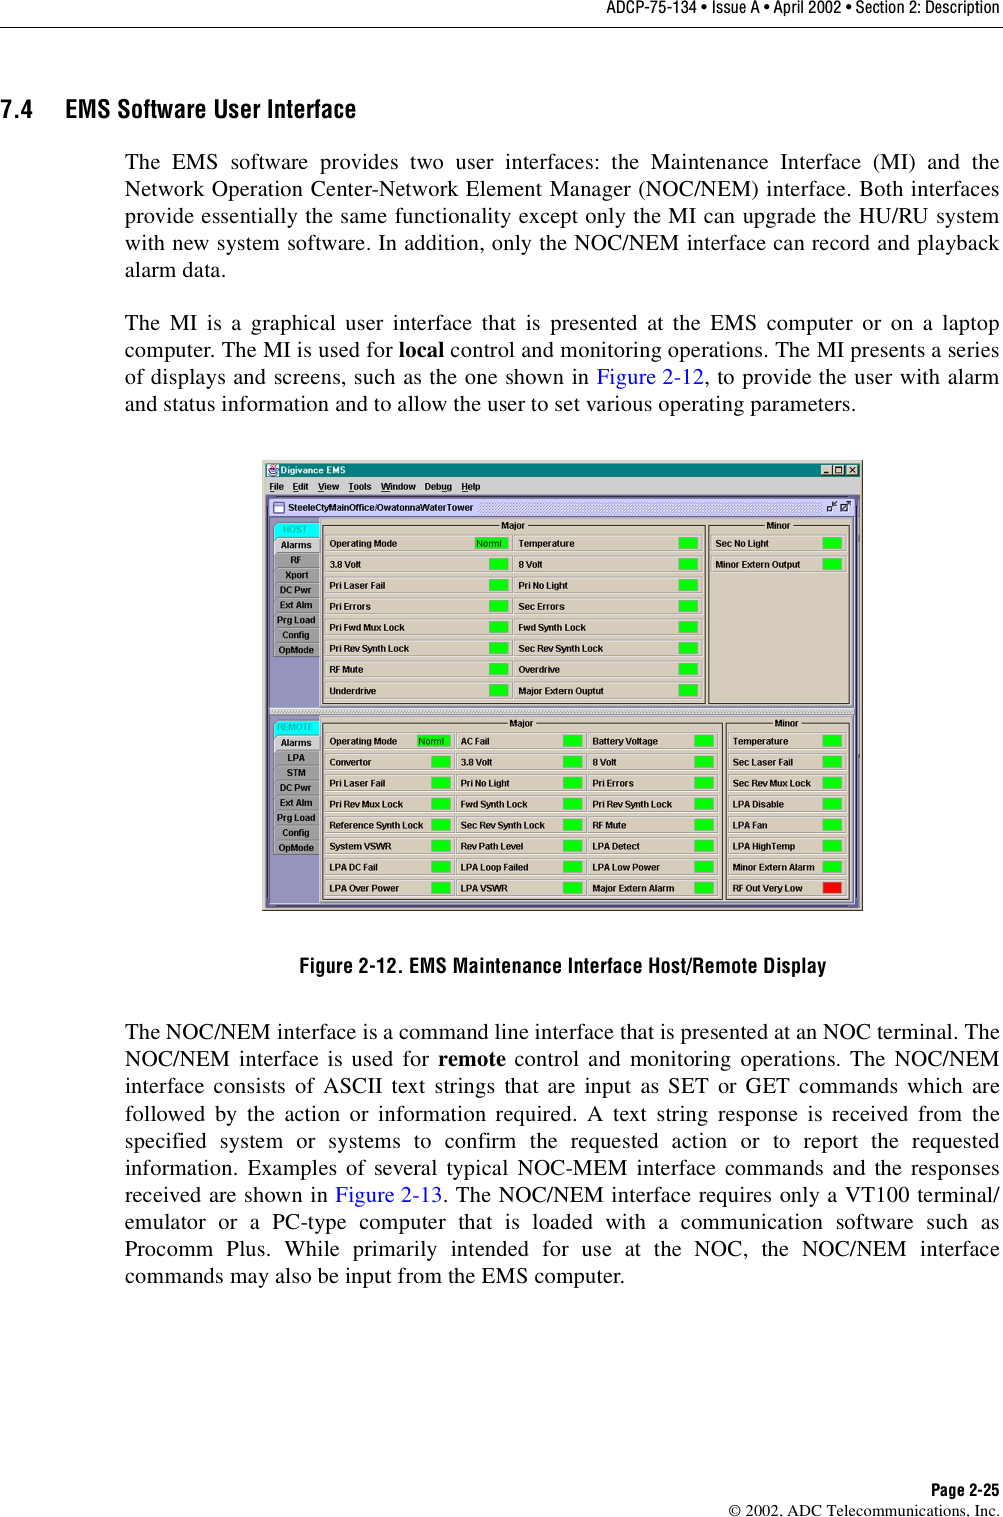 ADCP-75-134 • Issue A • April 2002 • Section 2: DescriptionPage 2-25©2002, ADC Telecommunications, Inc.7.4 EMS Software User InterfaceThe EMS software provides two user interfaces: the Maintenance Interface (MI) and theNetwork Operation Center-Network Element Manager (NOC/NEM) interface. Both interfacesprovide essentially the same functionality except only the MI can upgrade the HU/RU systemwith new system software. In addition, only the NOC/NEM interface can record and playbackalarm data.The MI is agraphical user interface that is presented at the EMS computer or on alaptopcomputer. The MI is used for local control and monitoring operations. The MI presents aseriesof displays and screens, such as the one shown in Figure 2-12,to provide the user with alarmand status information and to allow the user to set various operating parameters.Figure 2-12. EMS Maintenance Interface Host/Remote DisplayThe NOC/NEM interface is acommand line interface that is presented at an NOC terminal. TheNOC/NEM interface is used for remote control and monitoring operations. The NOC/NEMinterface consists of ASCII text strings that are input as SET or GET commands which arefollowed by the action or information required. Atext string response is received from thespecified system or systems to confirm the requested action or to report the requestedinformation. Examples of several typical NOC-MEM interface commands and the responsesreceived are shown in Figure 2-13.The NOC/NEM interface requires only aVT100 terminal/emulator or aPC-type computer that is loaded with acommunication software such asProcomm Plus. While primarily intended for use at the NOC, the NOC/NEM interfacecommands may also be input from the EMS computer.